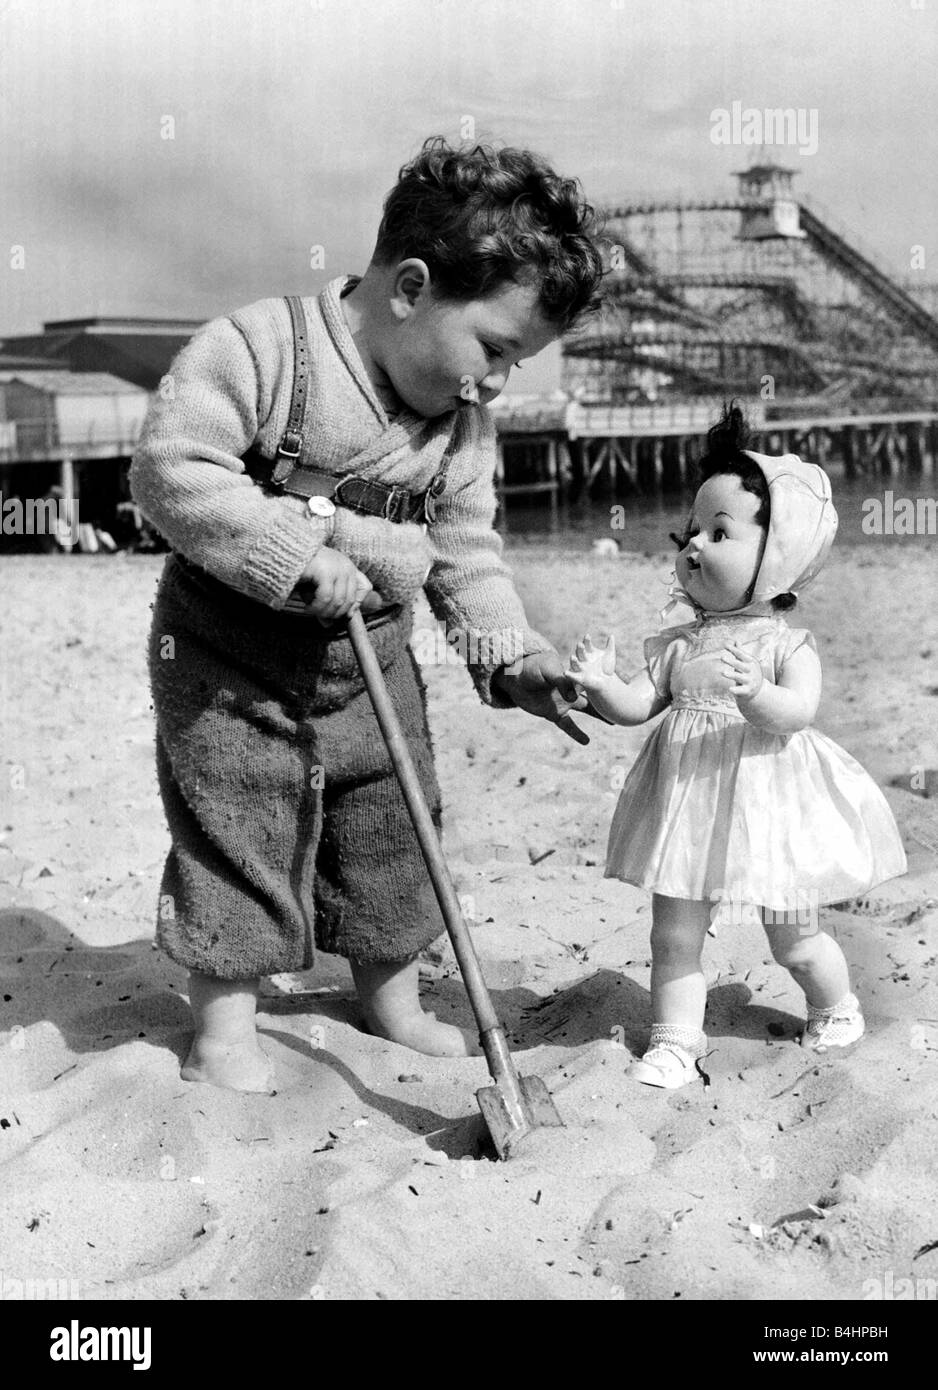 In Spring a young man s fancy likely turns to anyway this is a new version of boy meets girl Young Russell Bell aged 2 was never more surprised than when walking along the sands of Clacton Essex he saw Mabel the doll waiting Of course Mabel had strayed away from her real owner or had probably been left but Russell was fascinated never the less Stock Photo